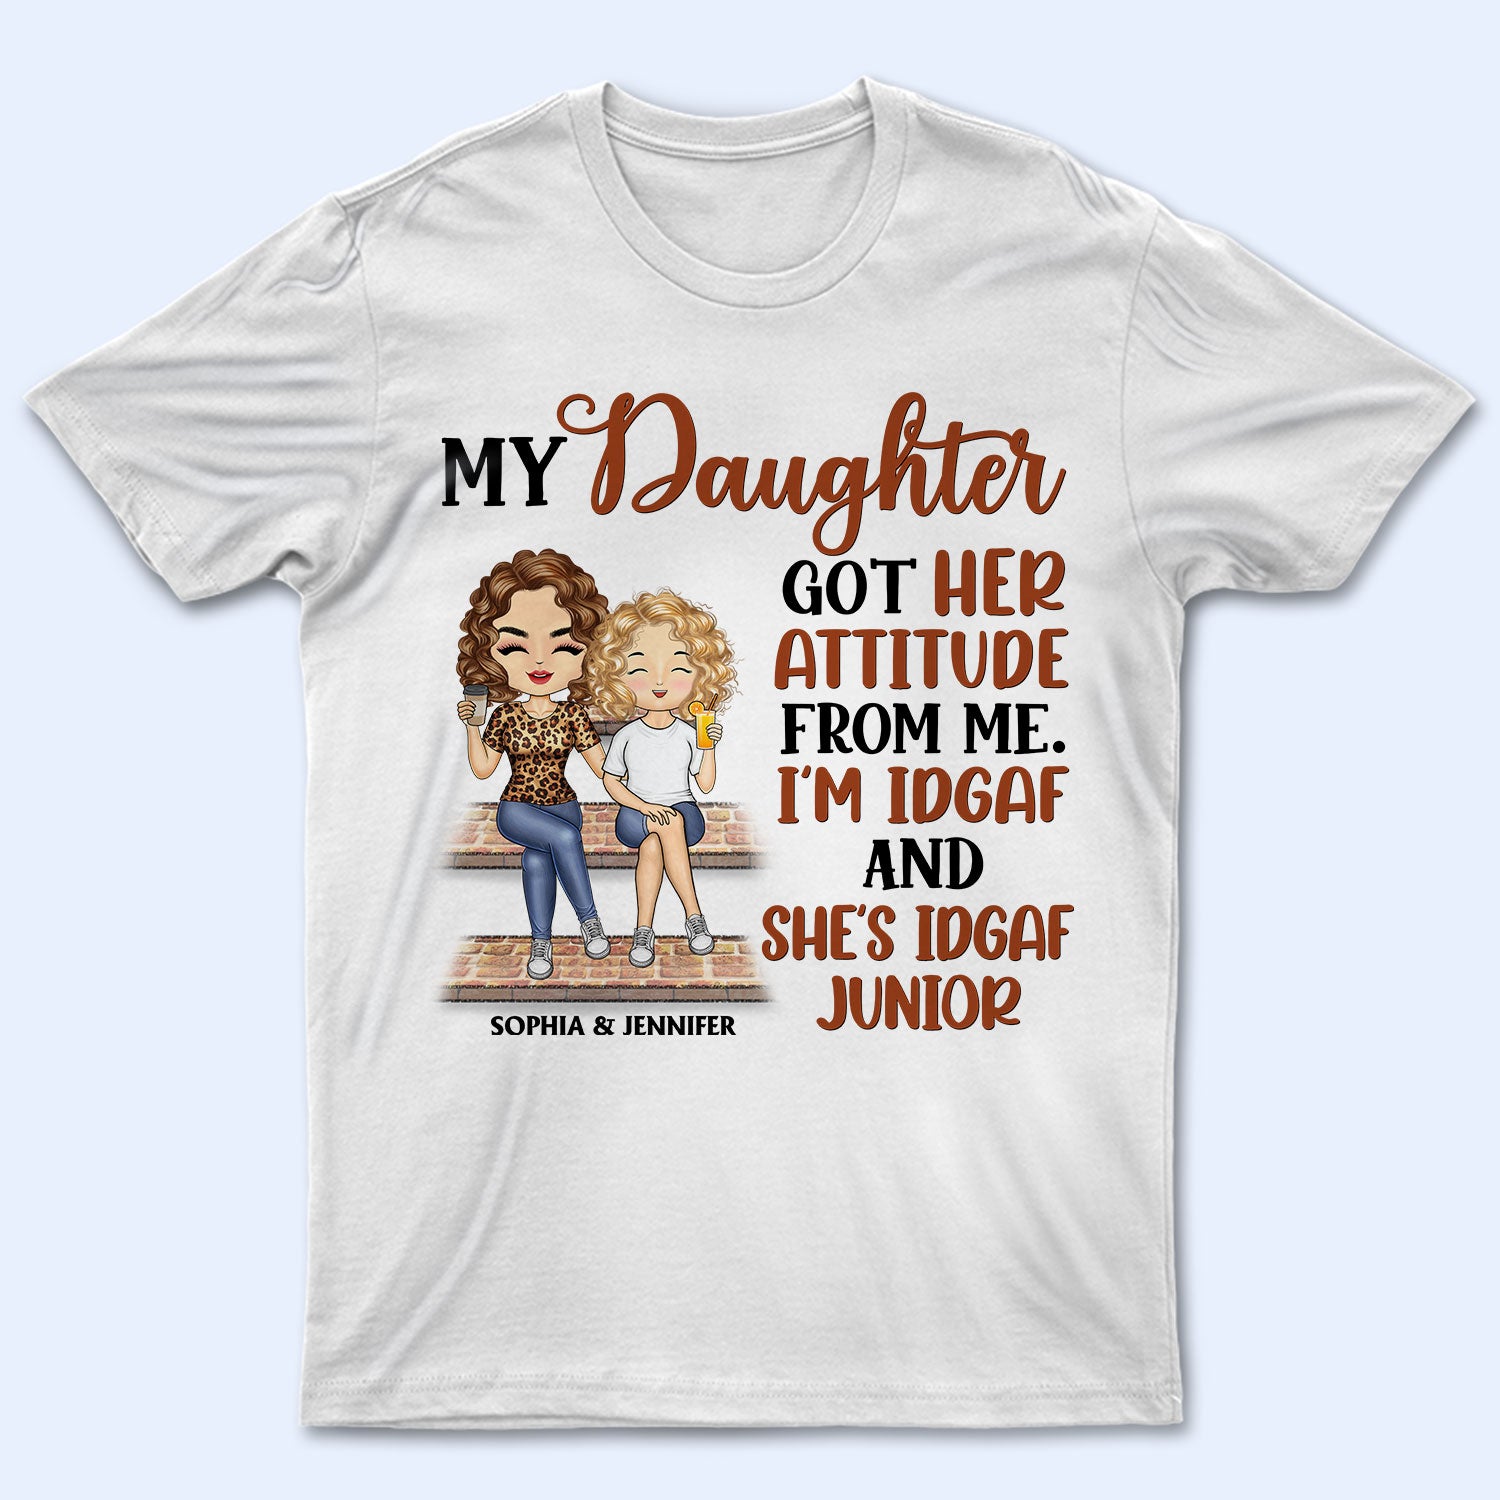 My Daughter Got Her Attitude From Me - Birthday, Loving Gift For Mom, Mother, Grandma, Grandmother - Personalized Custom T Shirt